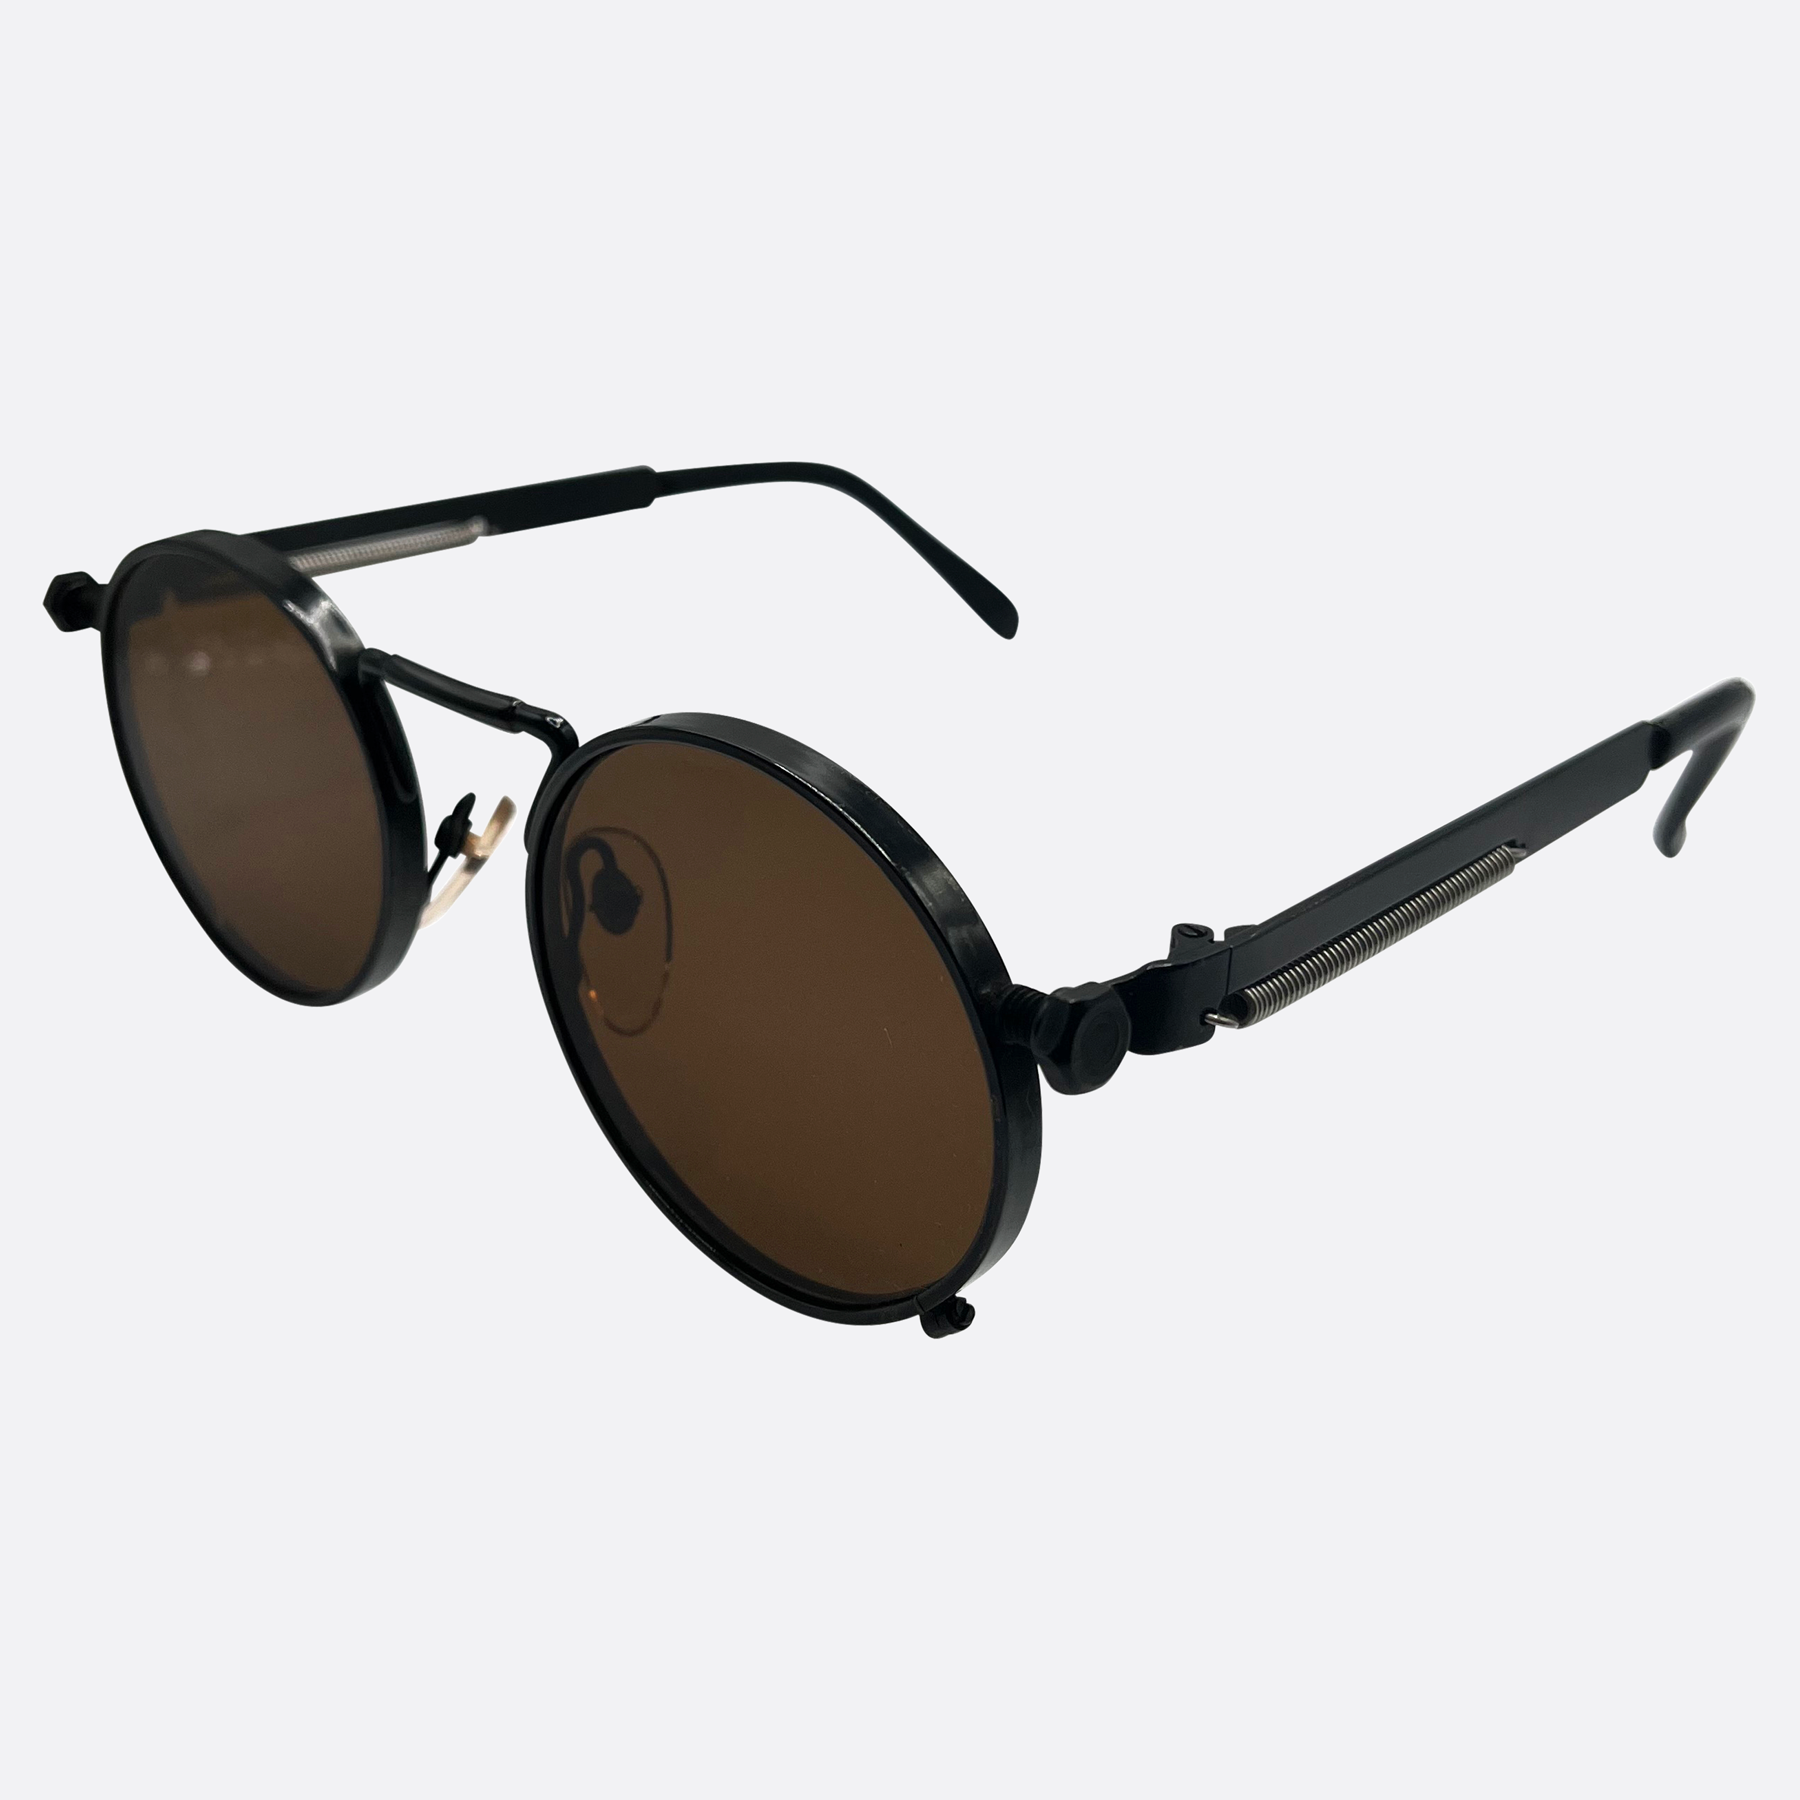 PROCESS Round Steampunk Sunglasses | Luxe Vintage